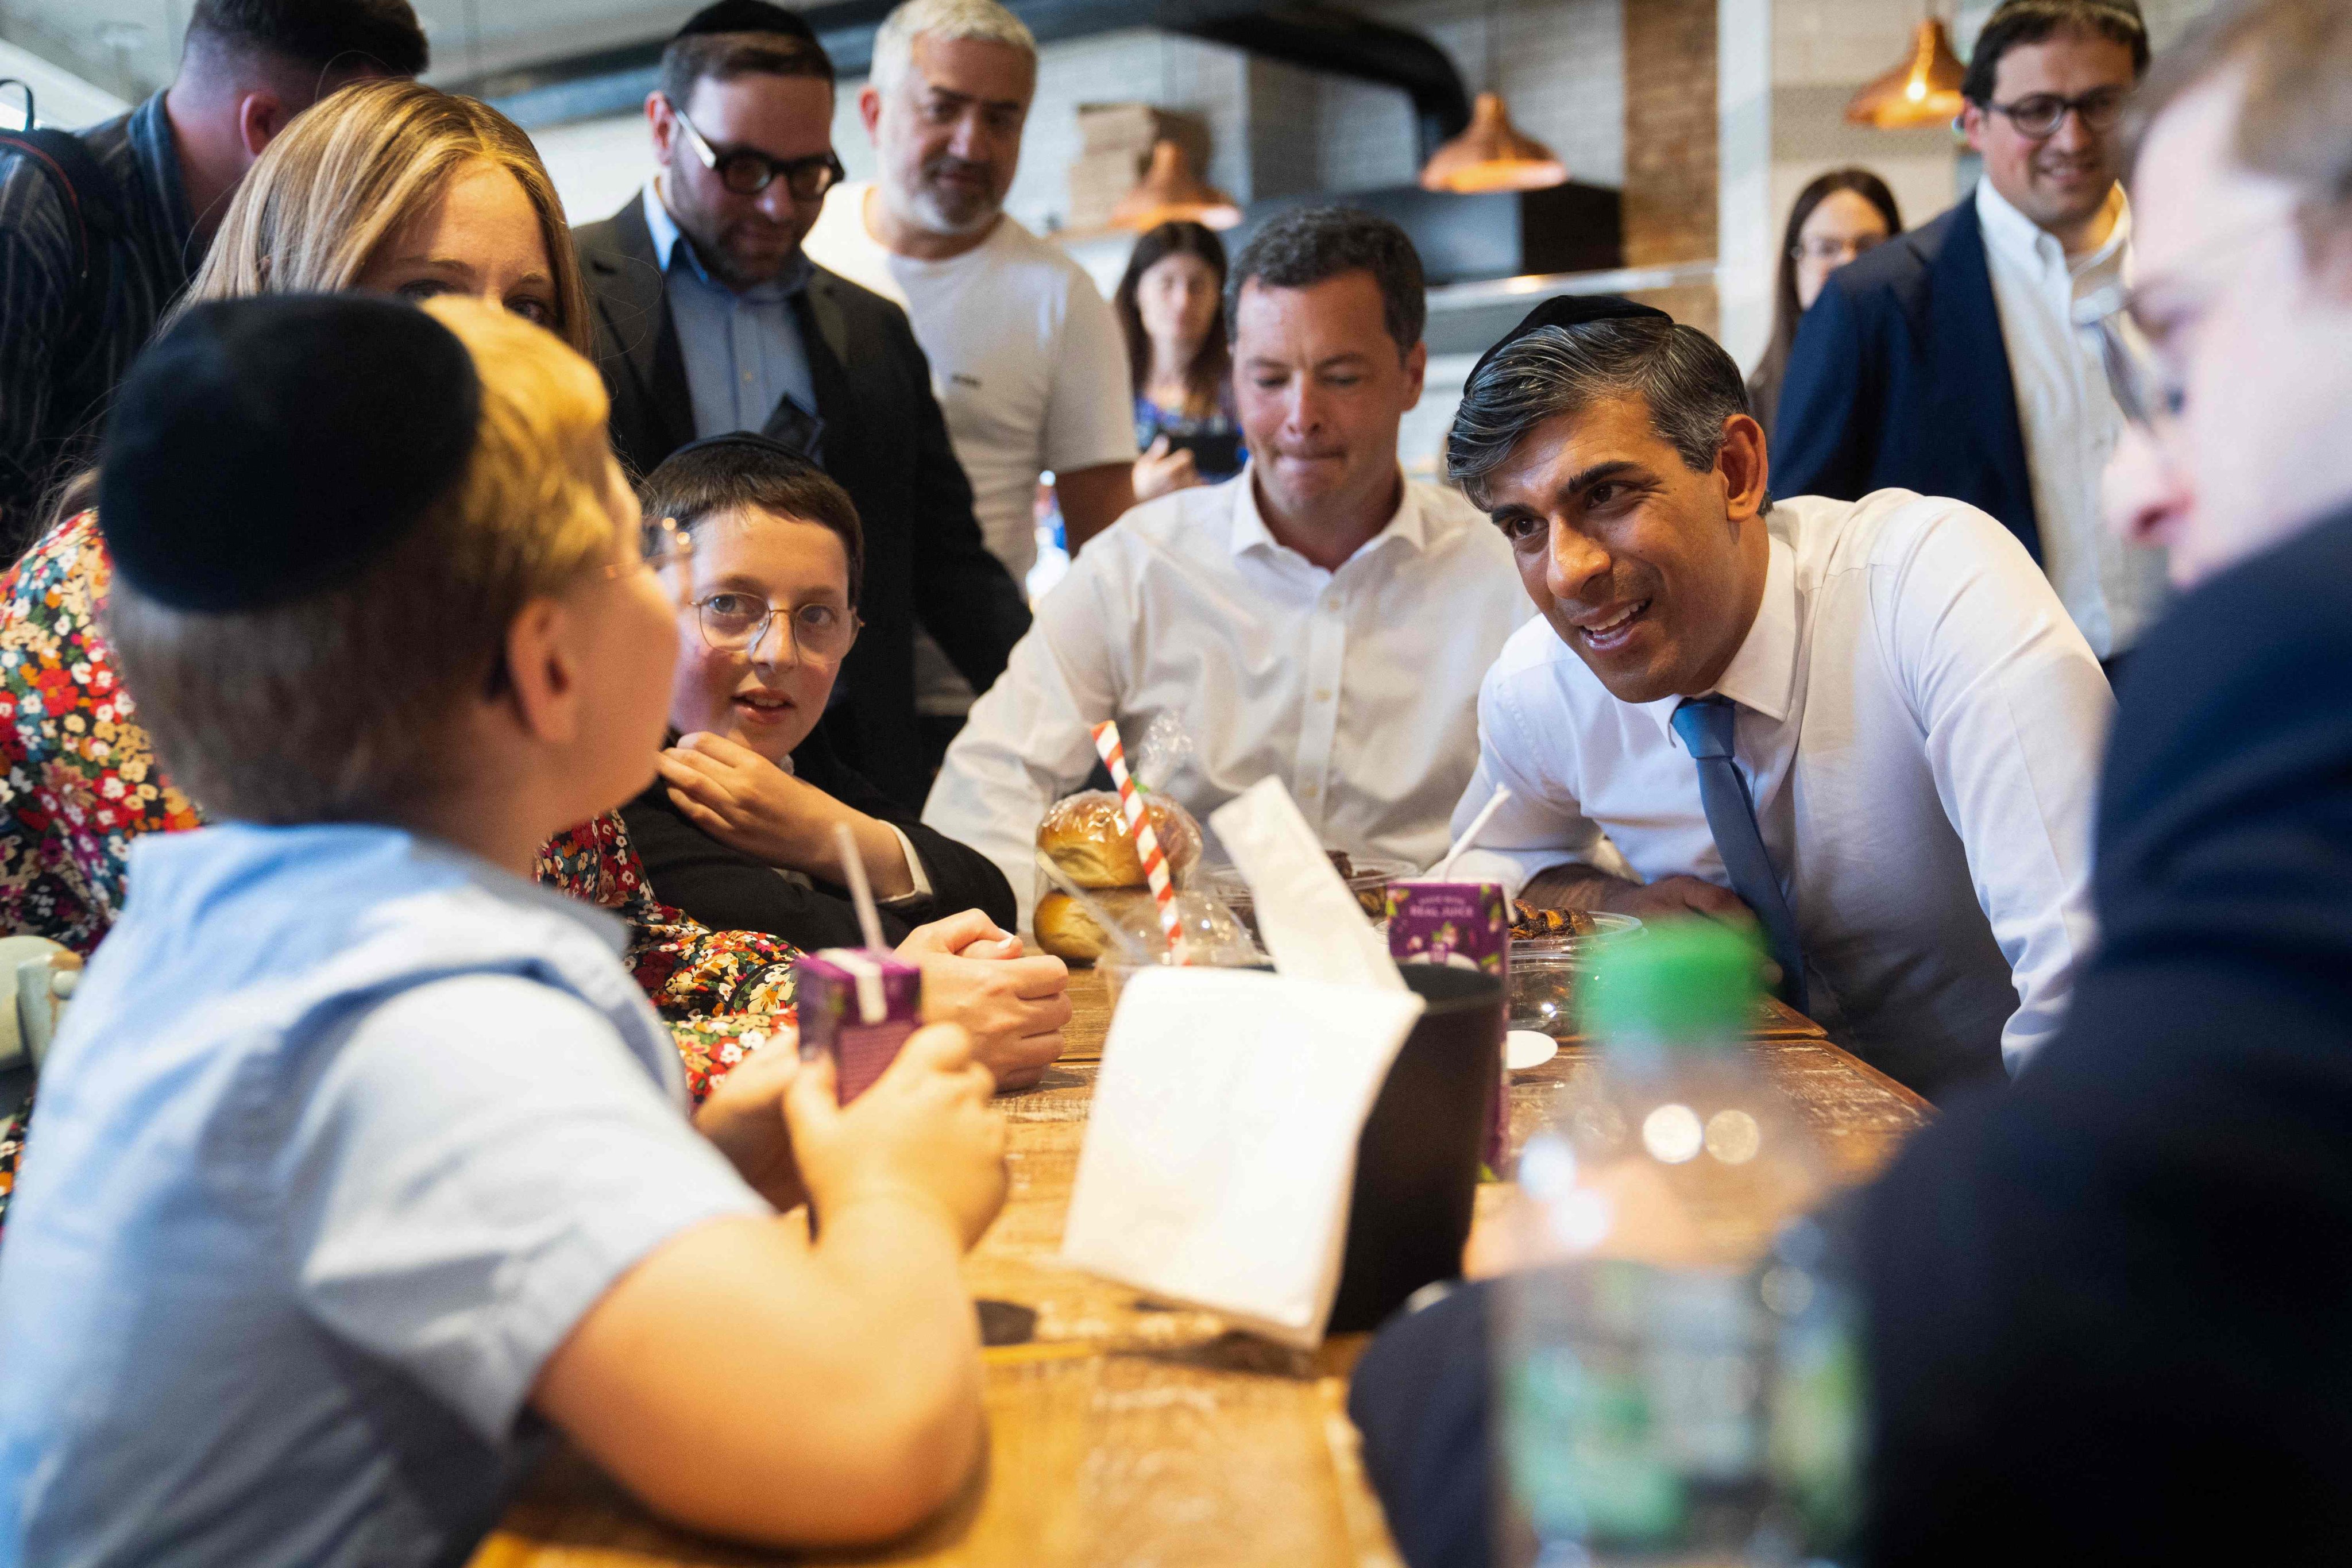 Britain’s Prime Minister and Conservative Party leader Rishi Sunak at a campaign event in London on June 30. The UK general election is on July 4. Photo: AFP